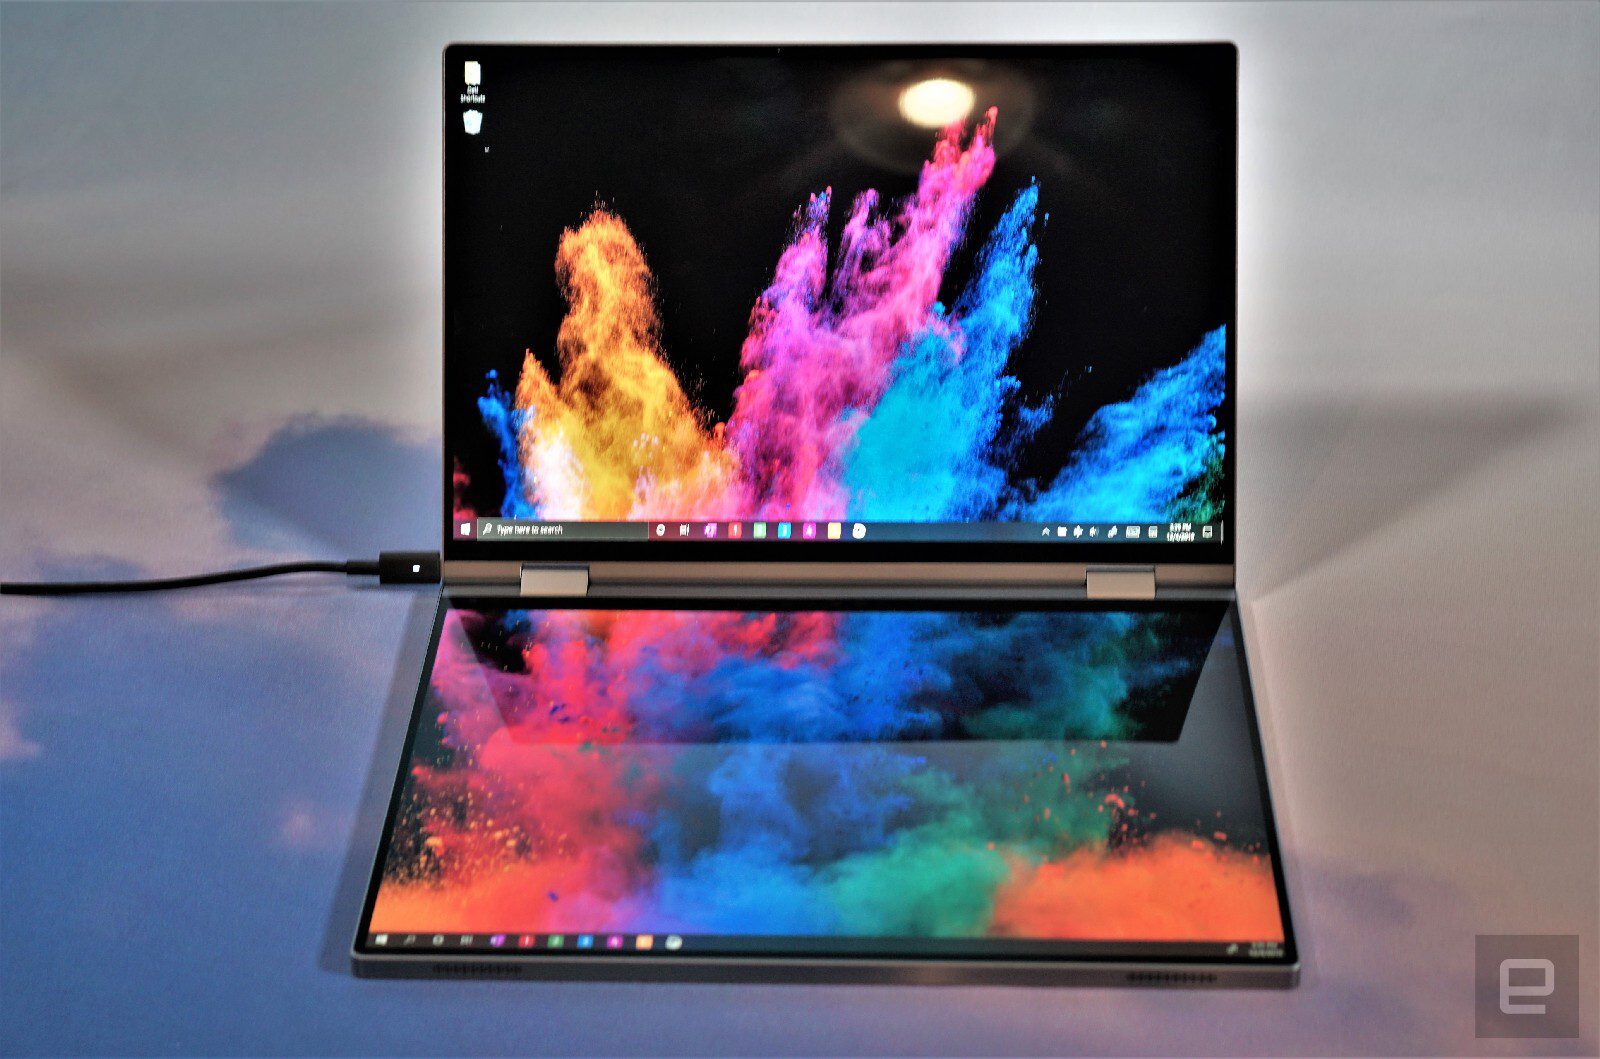 Dell showed off two folding Windows 10 laptops #CES2020